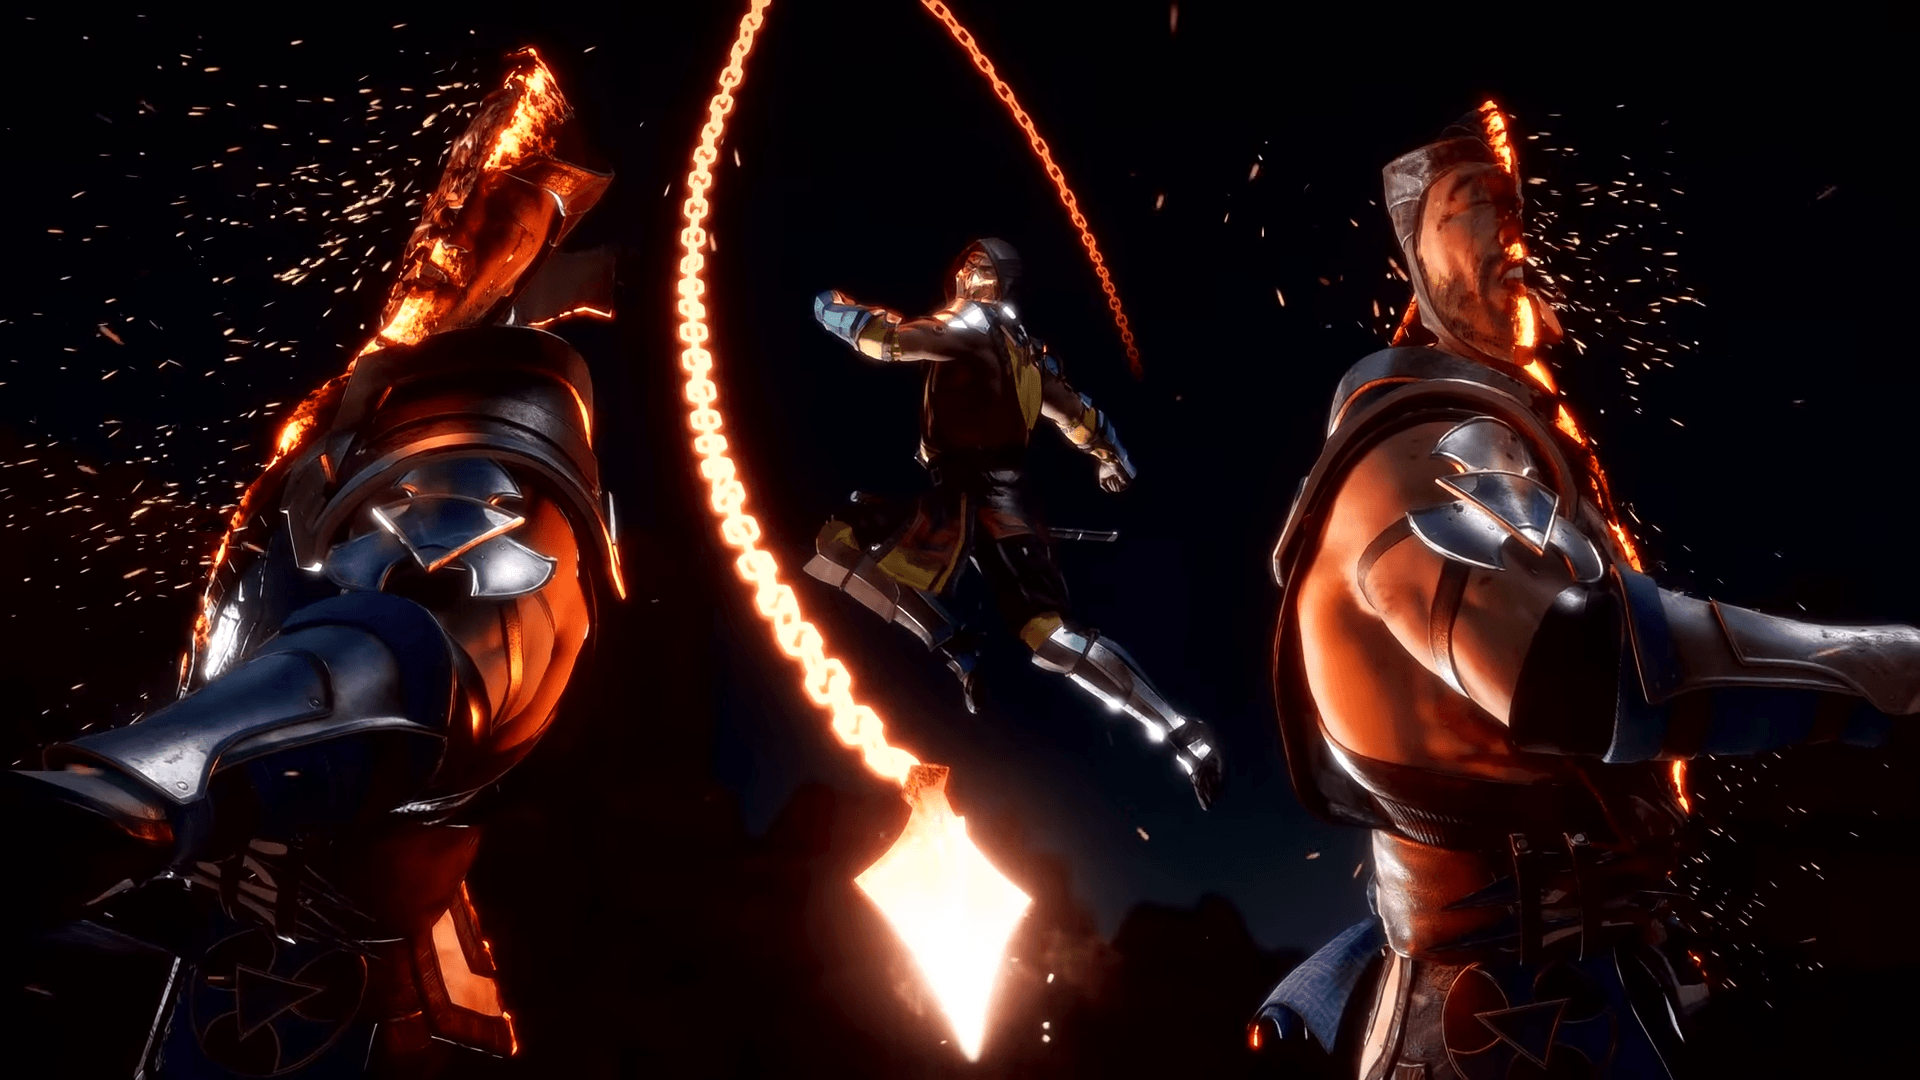 This screenshot I took from Scorpion's fatality is pretty